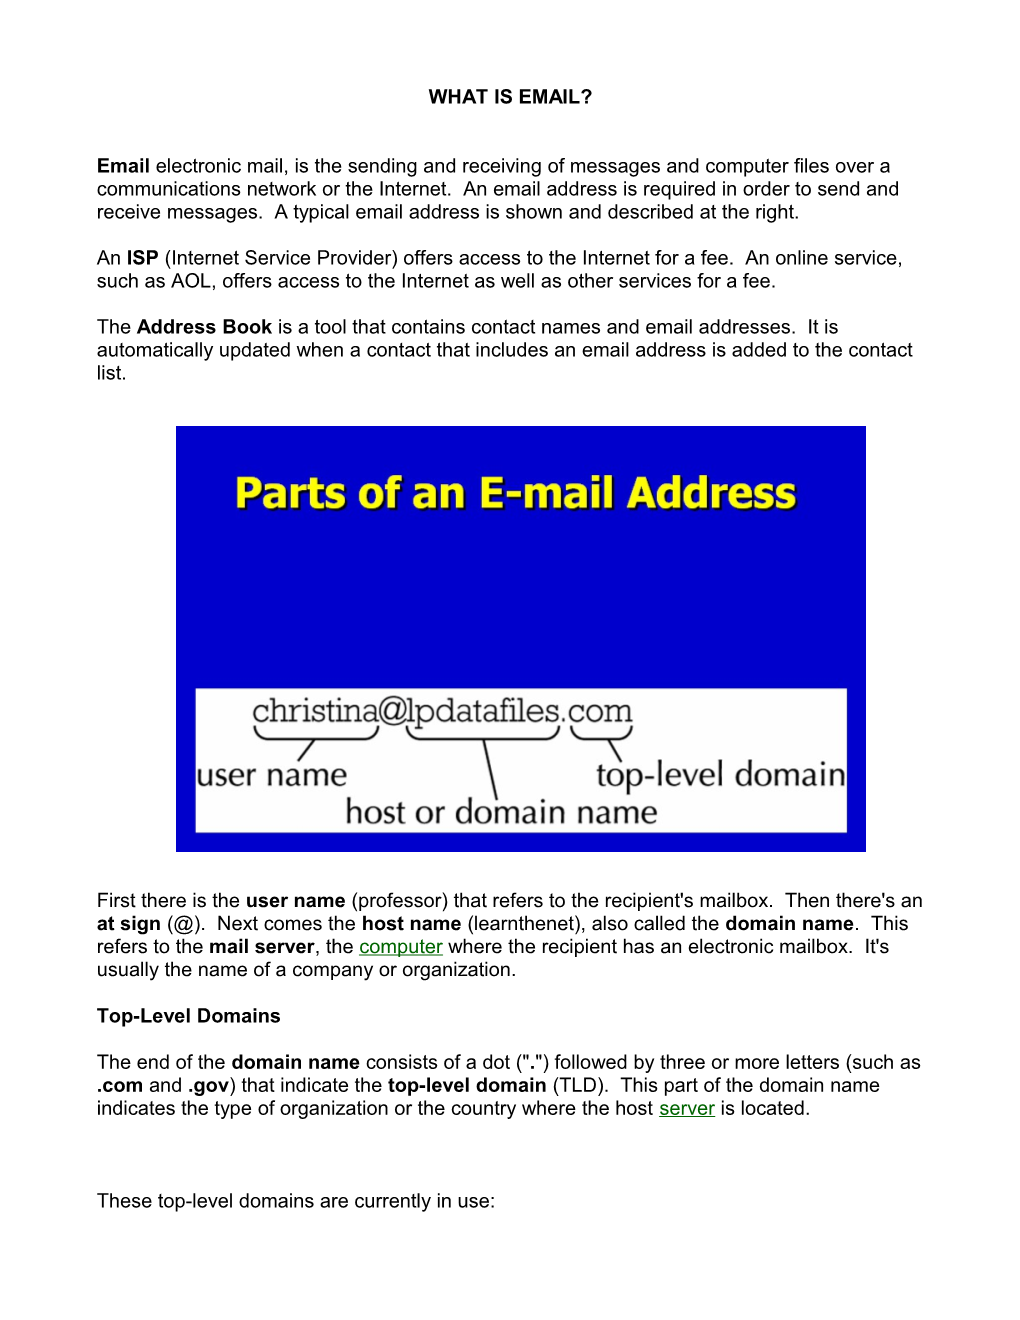 Email Electronic Mail, Is the Sending and Receiving of Messages and Computer Files Over